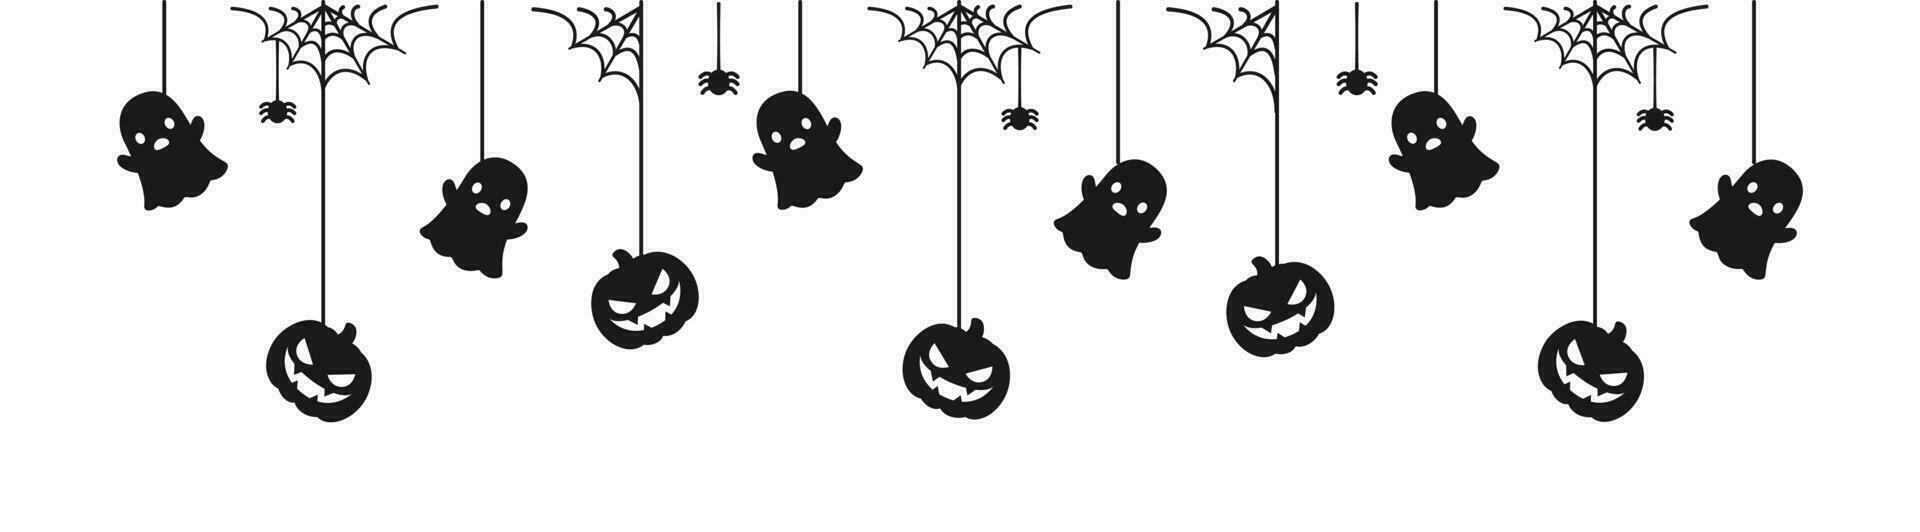 Happy Halloween banner or border with black ghost and jack o lantern pumpkins. Hanging Spooky Ornaments Decoration Vector illustration, trick or treat party invitation